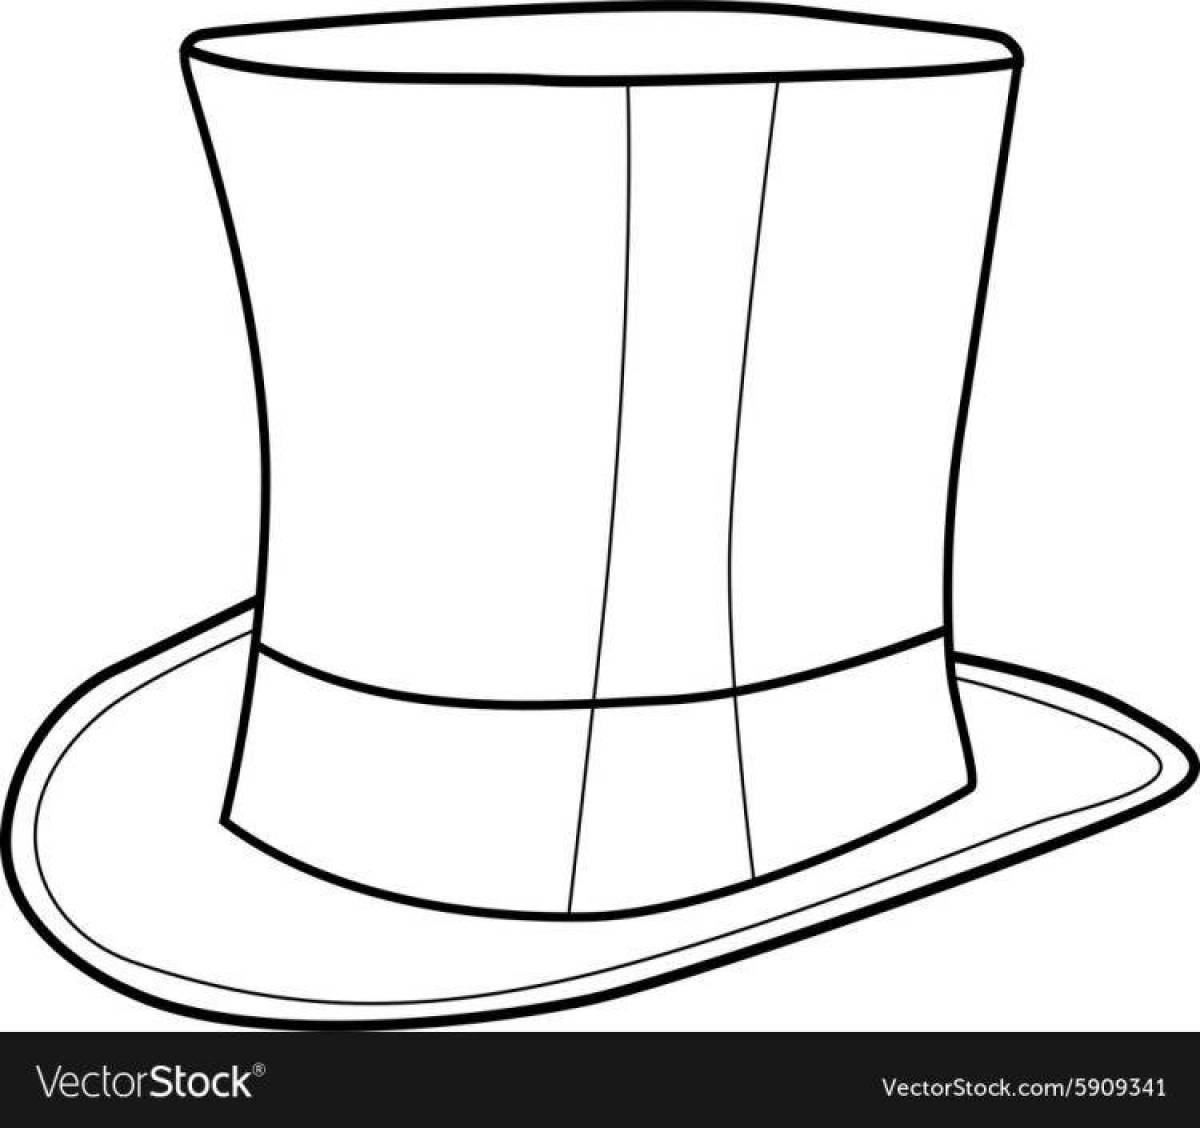 Silly top hat coloring page